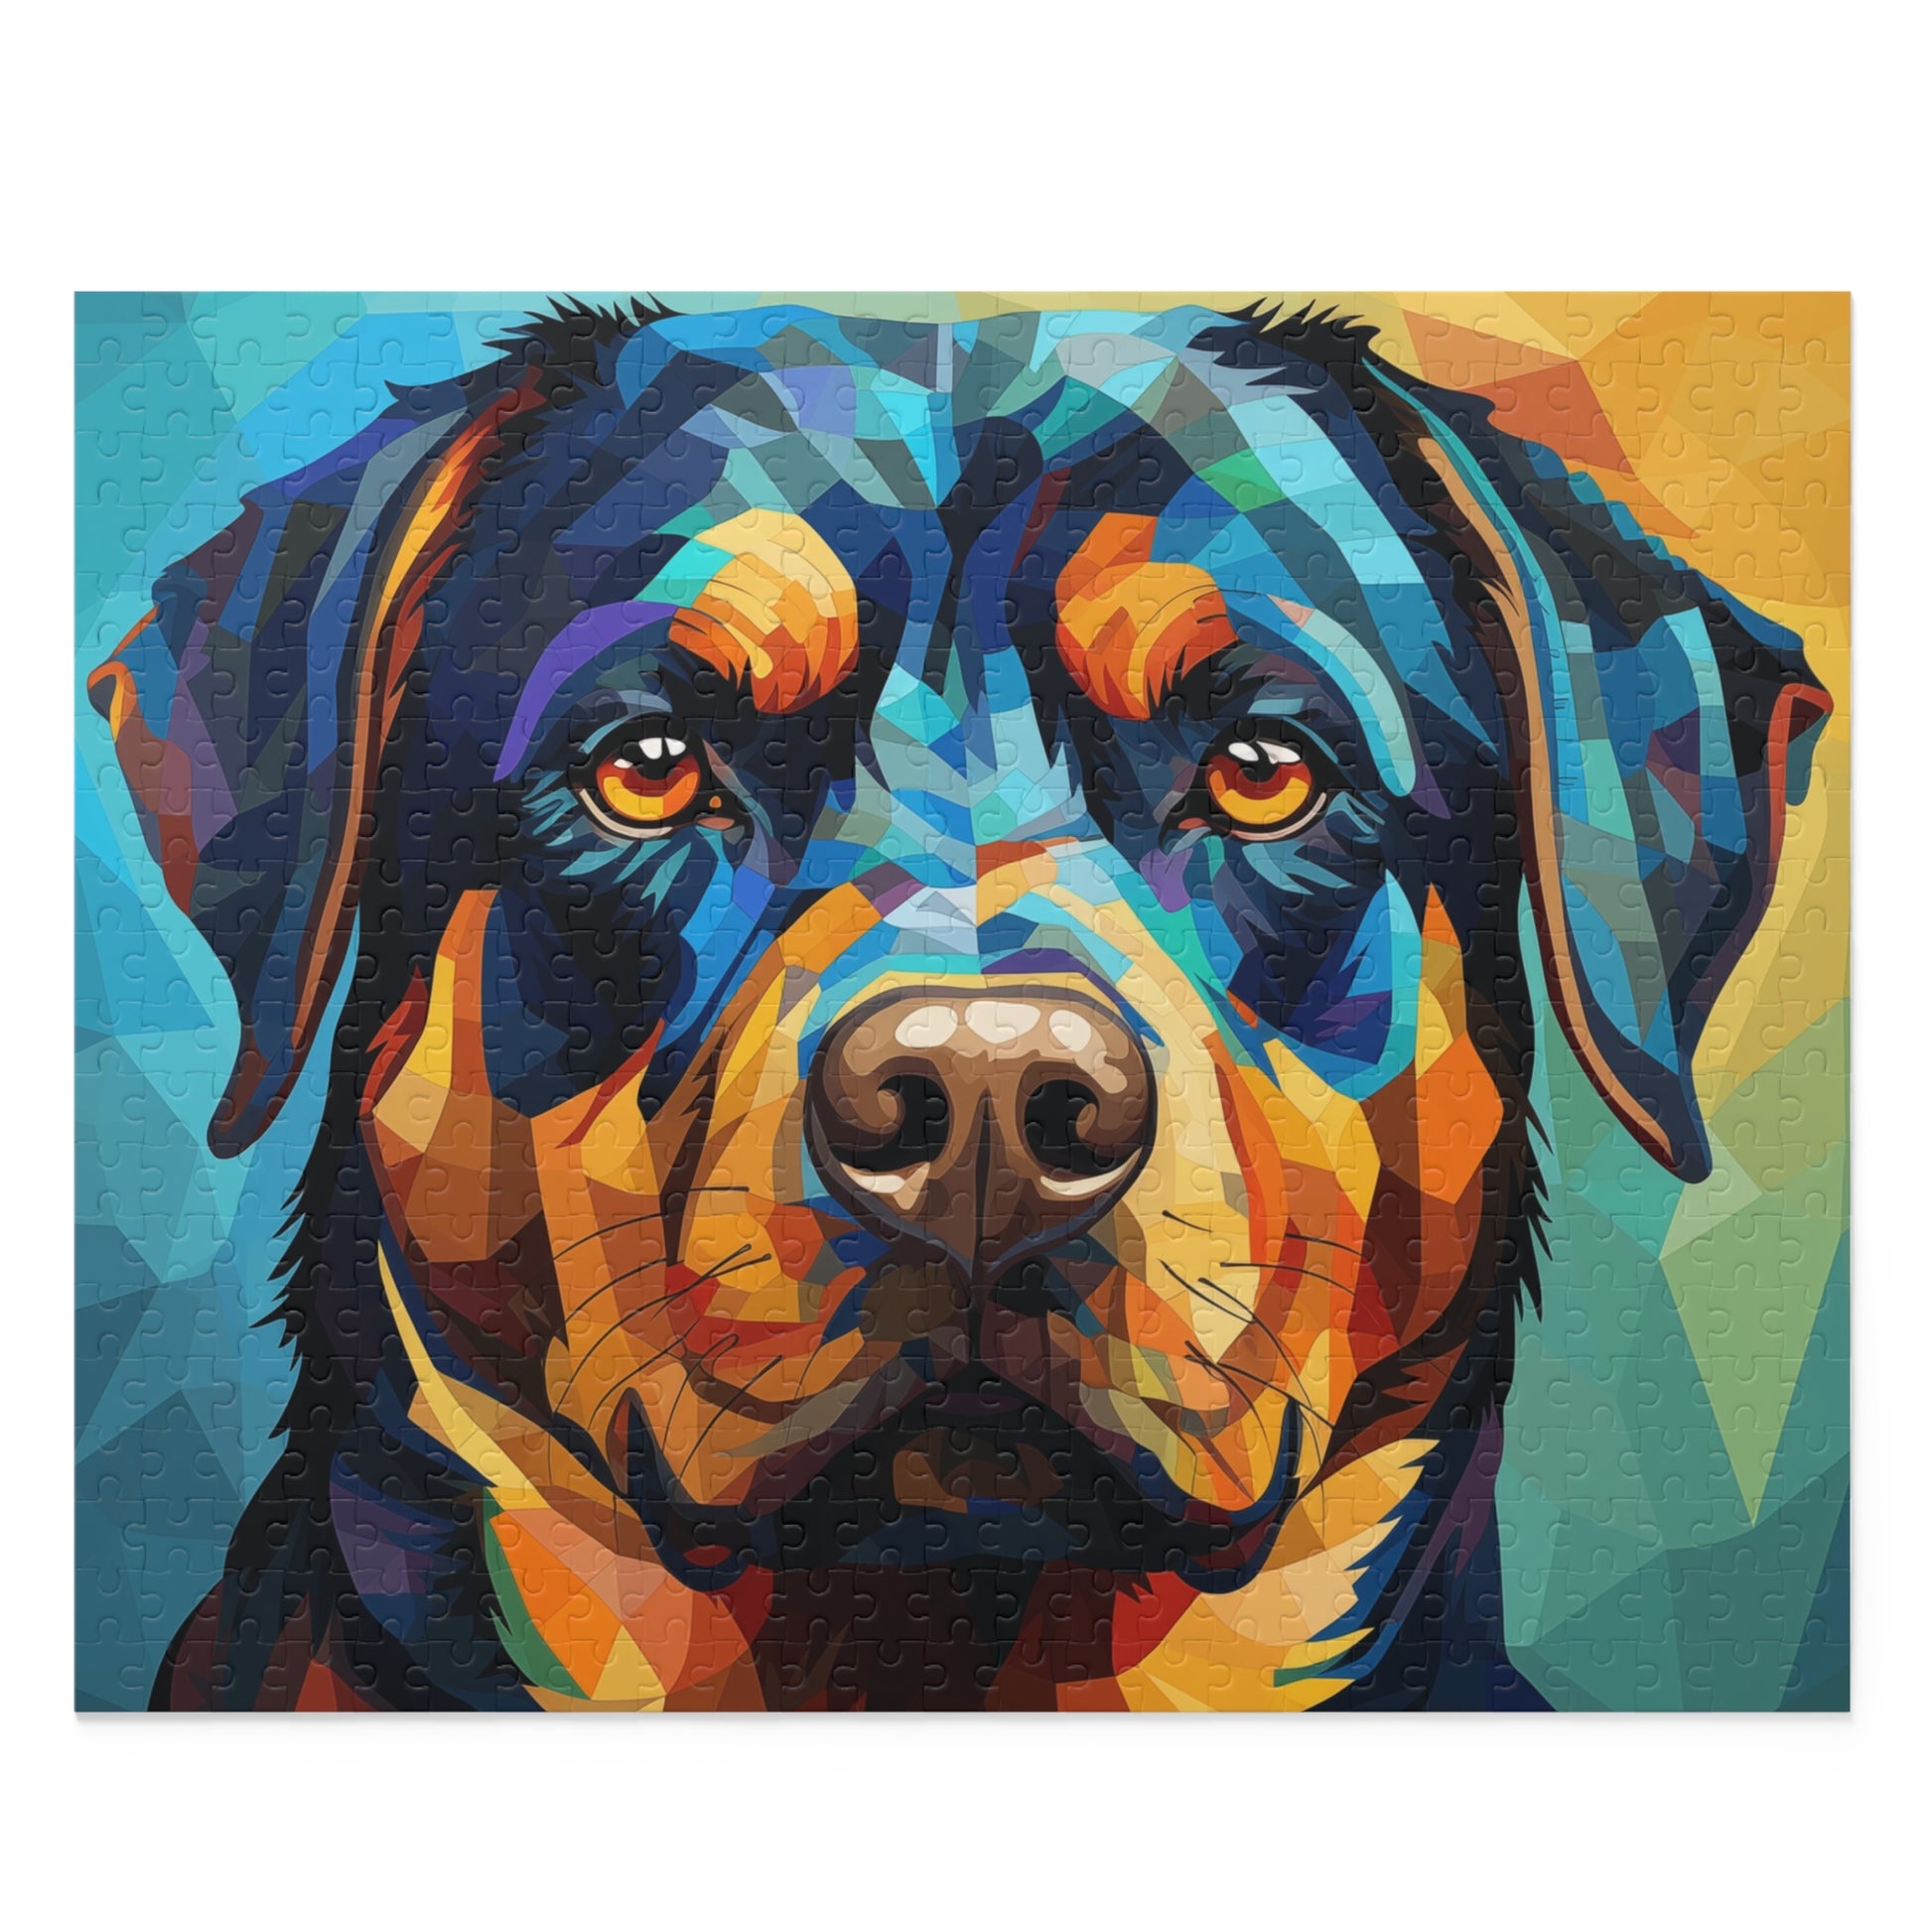 Watercolor Rottweiler Puzzle for Boys, Girls, Kids - Jigsaw Vibrant Oil Paint Dog Puzzle - Abstract Lover Gift - Rottweiler Trippy Puzzle Adult Birthday Business Jigsaw Puzzle Gift for Him Funny Humorous Indoor Outdoor Game Gift For Her Online-1